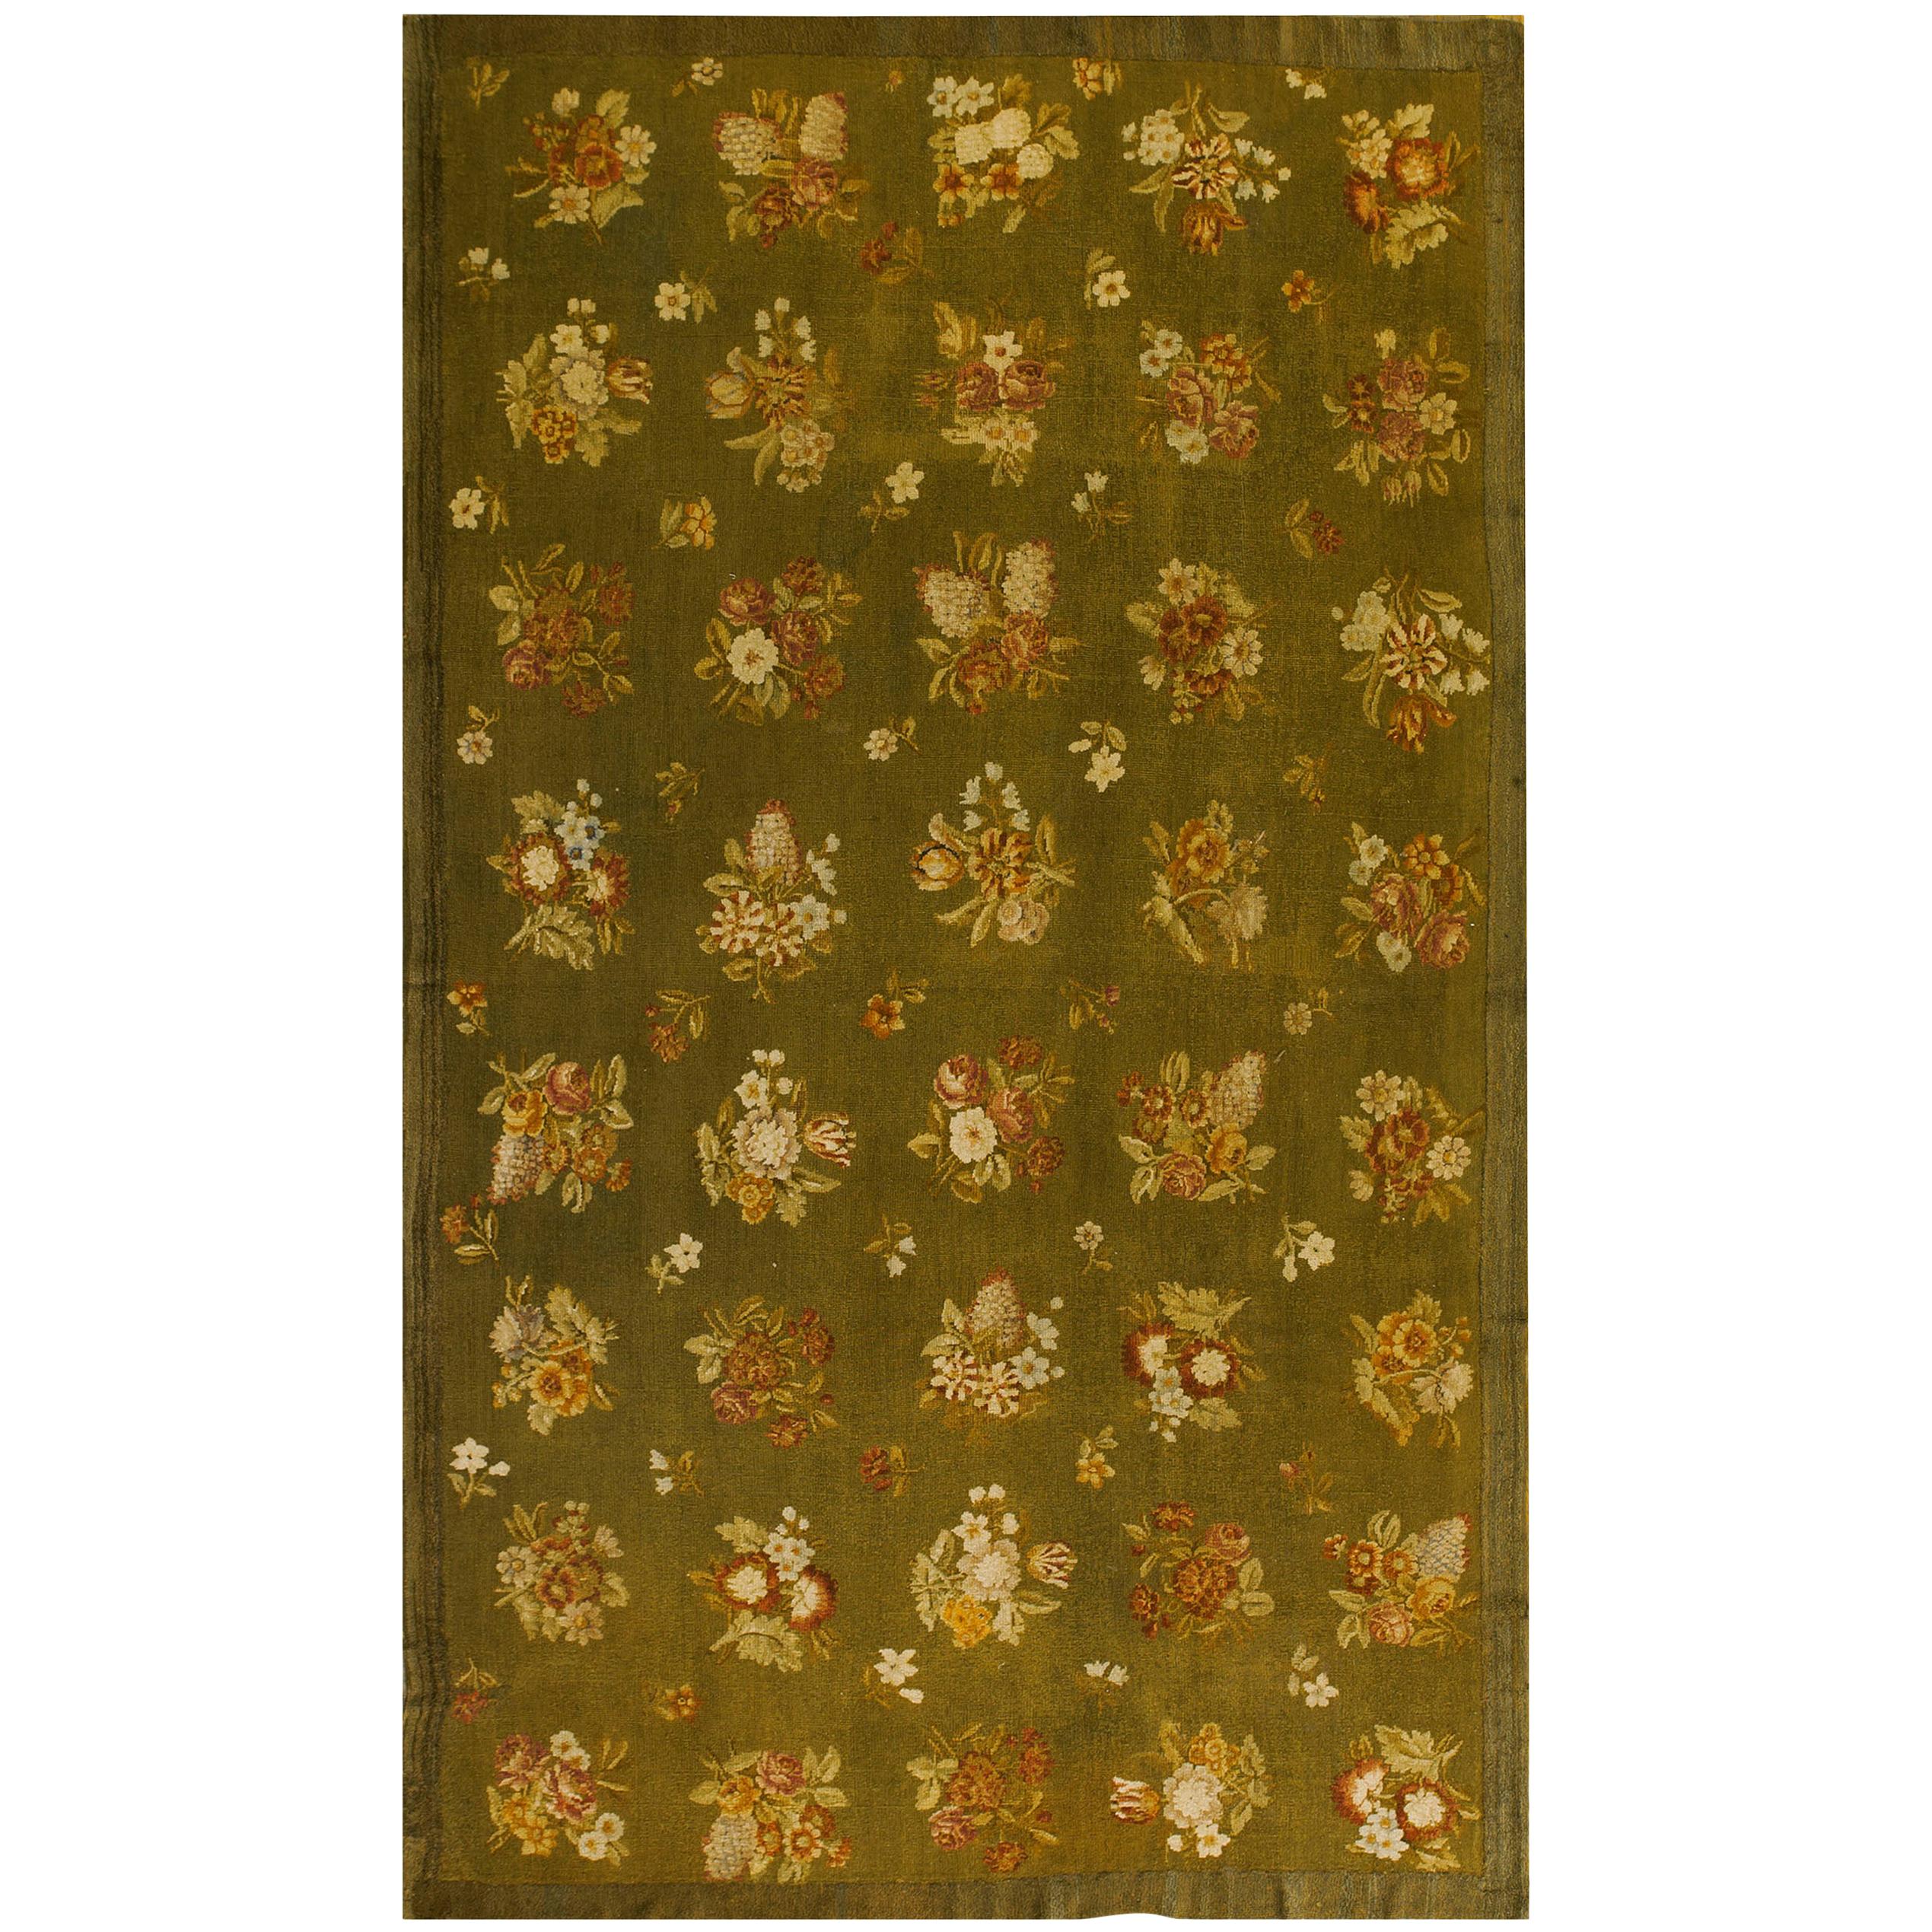 Early 19th Century French Empire Period Savonnerie Carpet ( 8'x13'6" - 243x412 ) For Sale